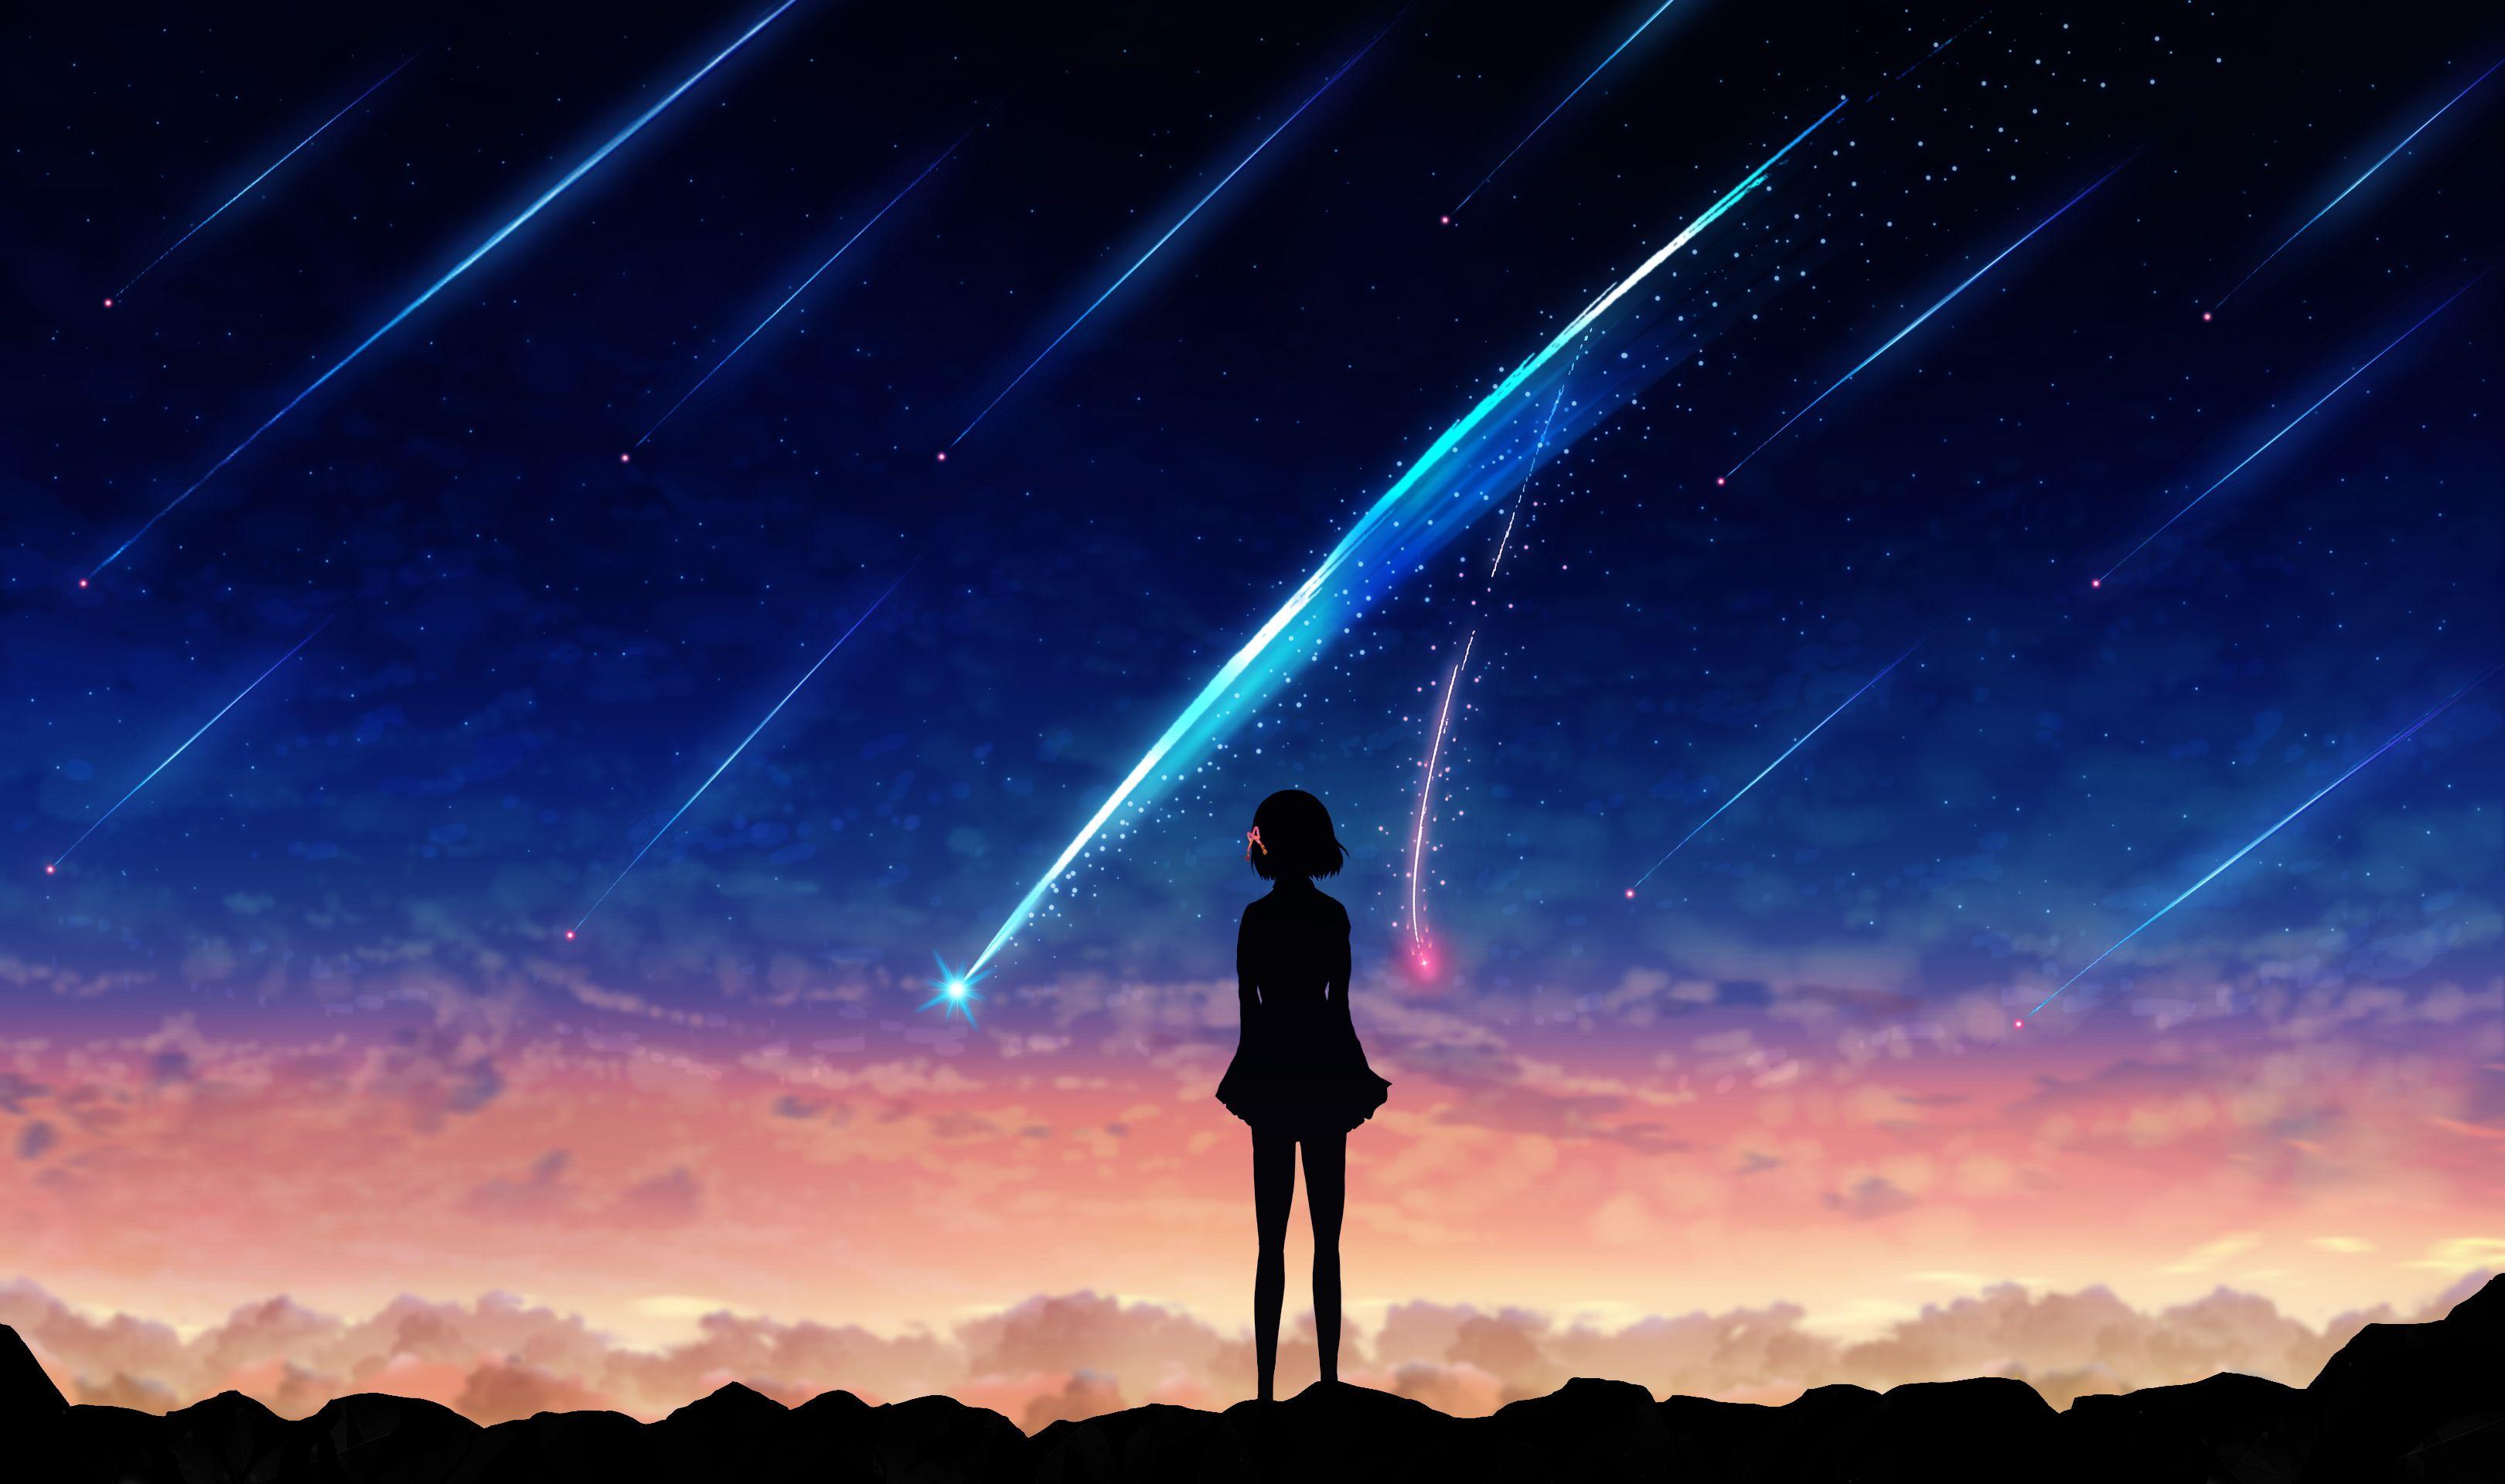 BEST WALLPAPER: Your Name Wallpapers PC